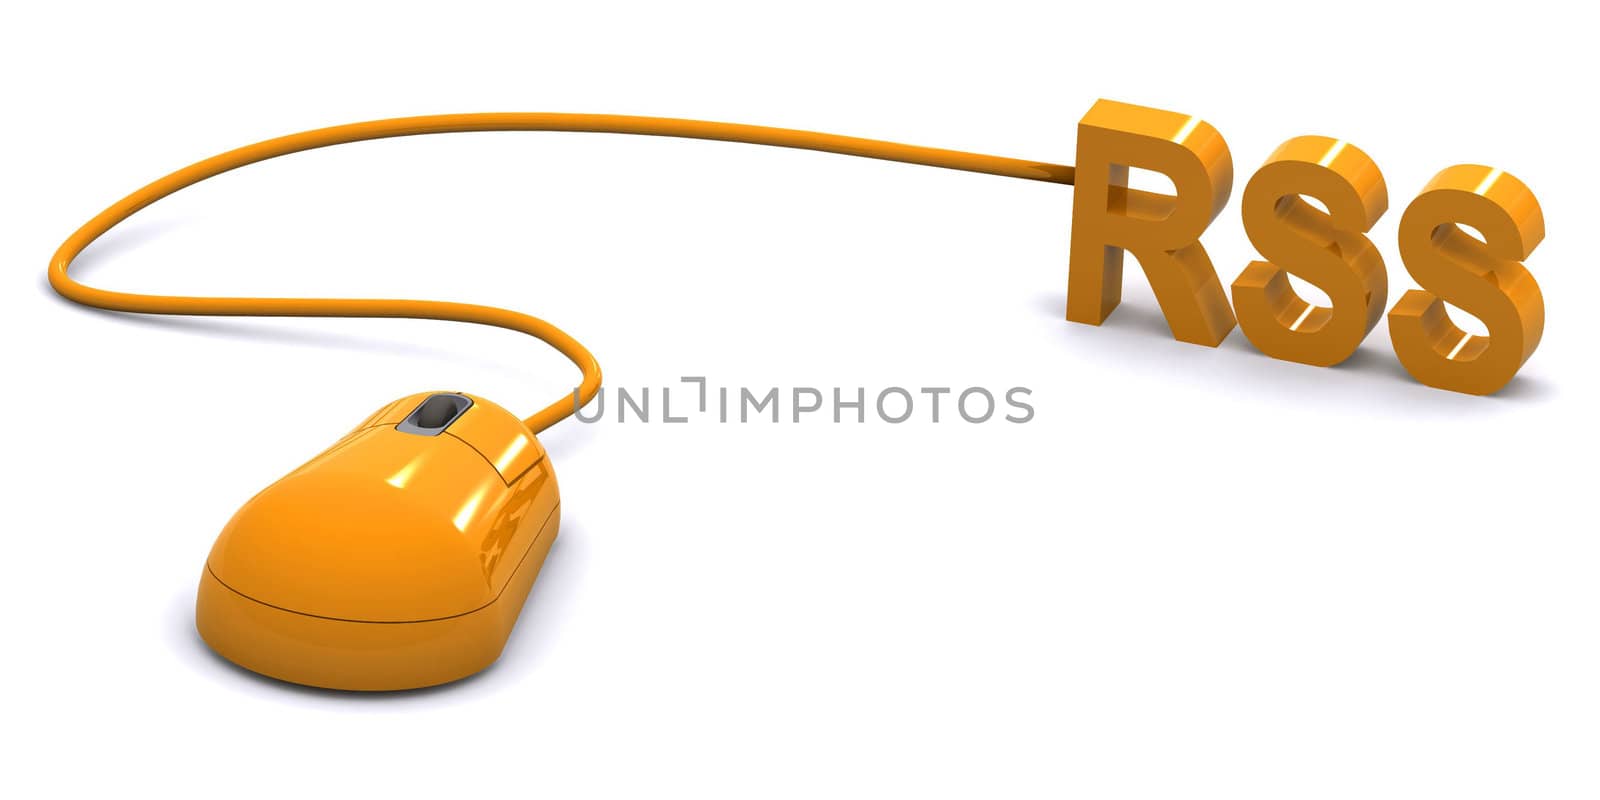 A Colourful 3d Rendered RSS Concept Illustration